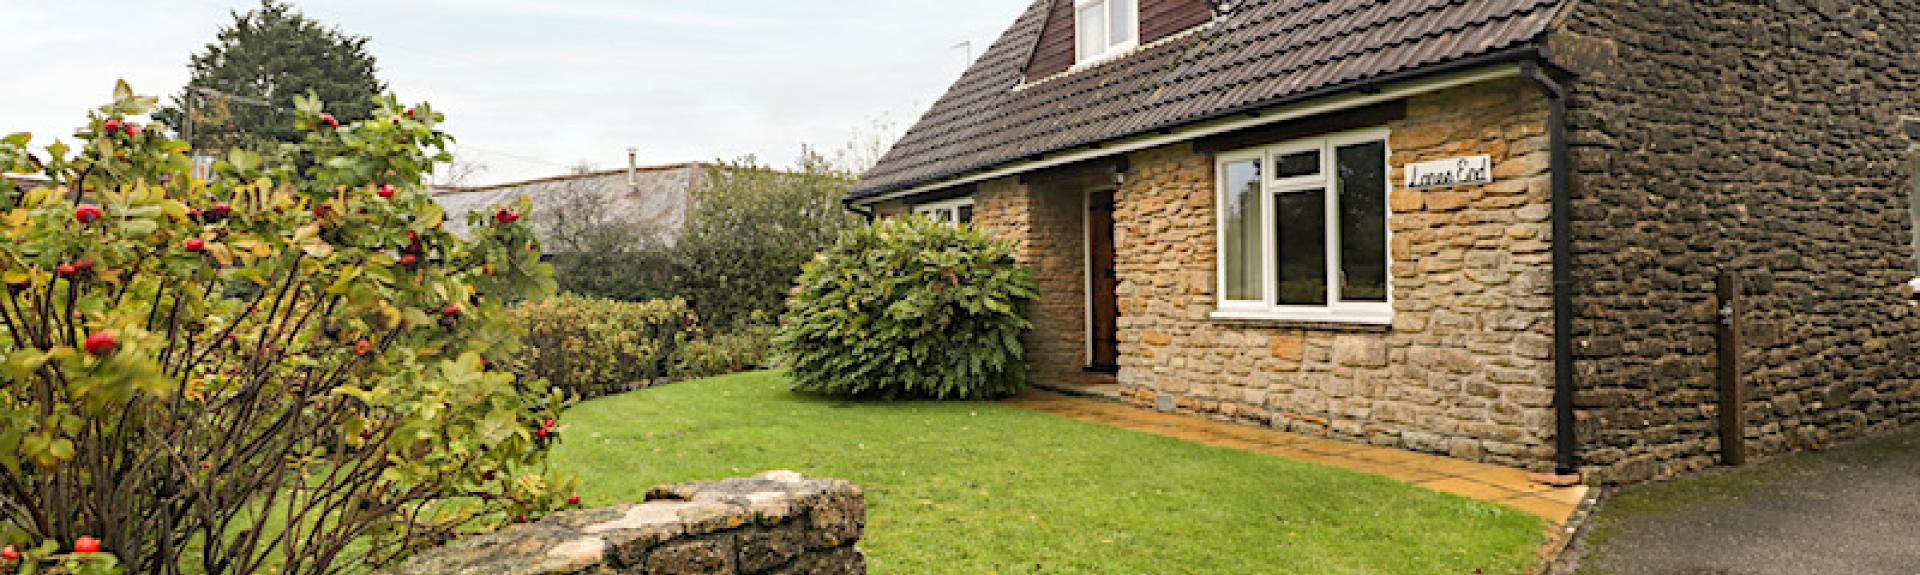 Exterior of a stone-built Dorset chalet bungalow overlooking a front lawn and drive.